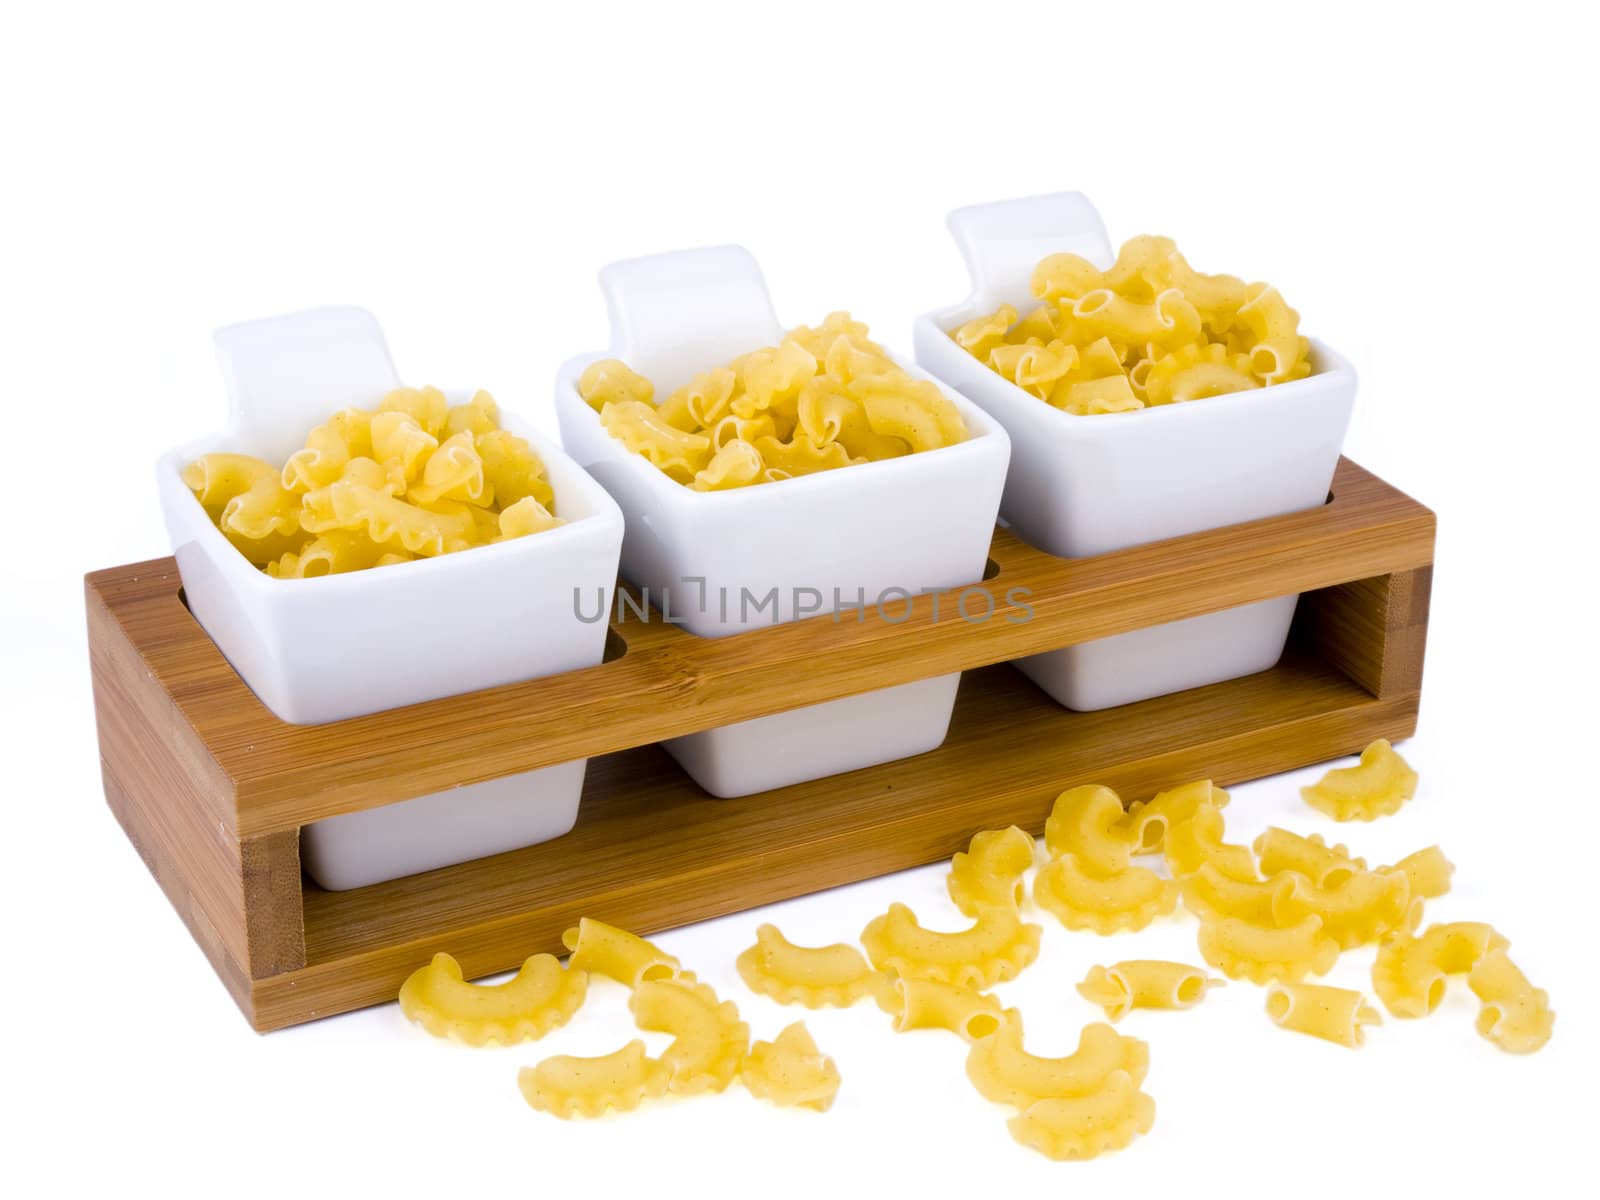 Three porceline bowls filled with pasta on white background